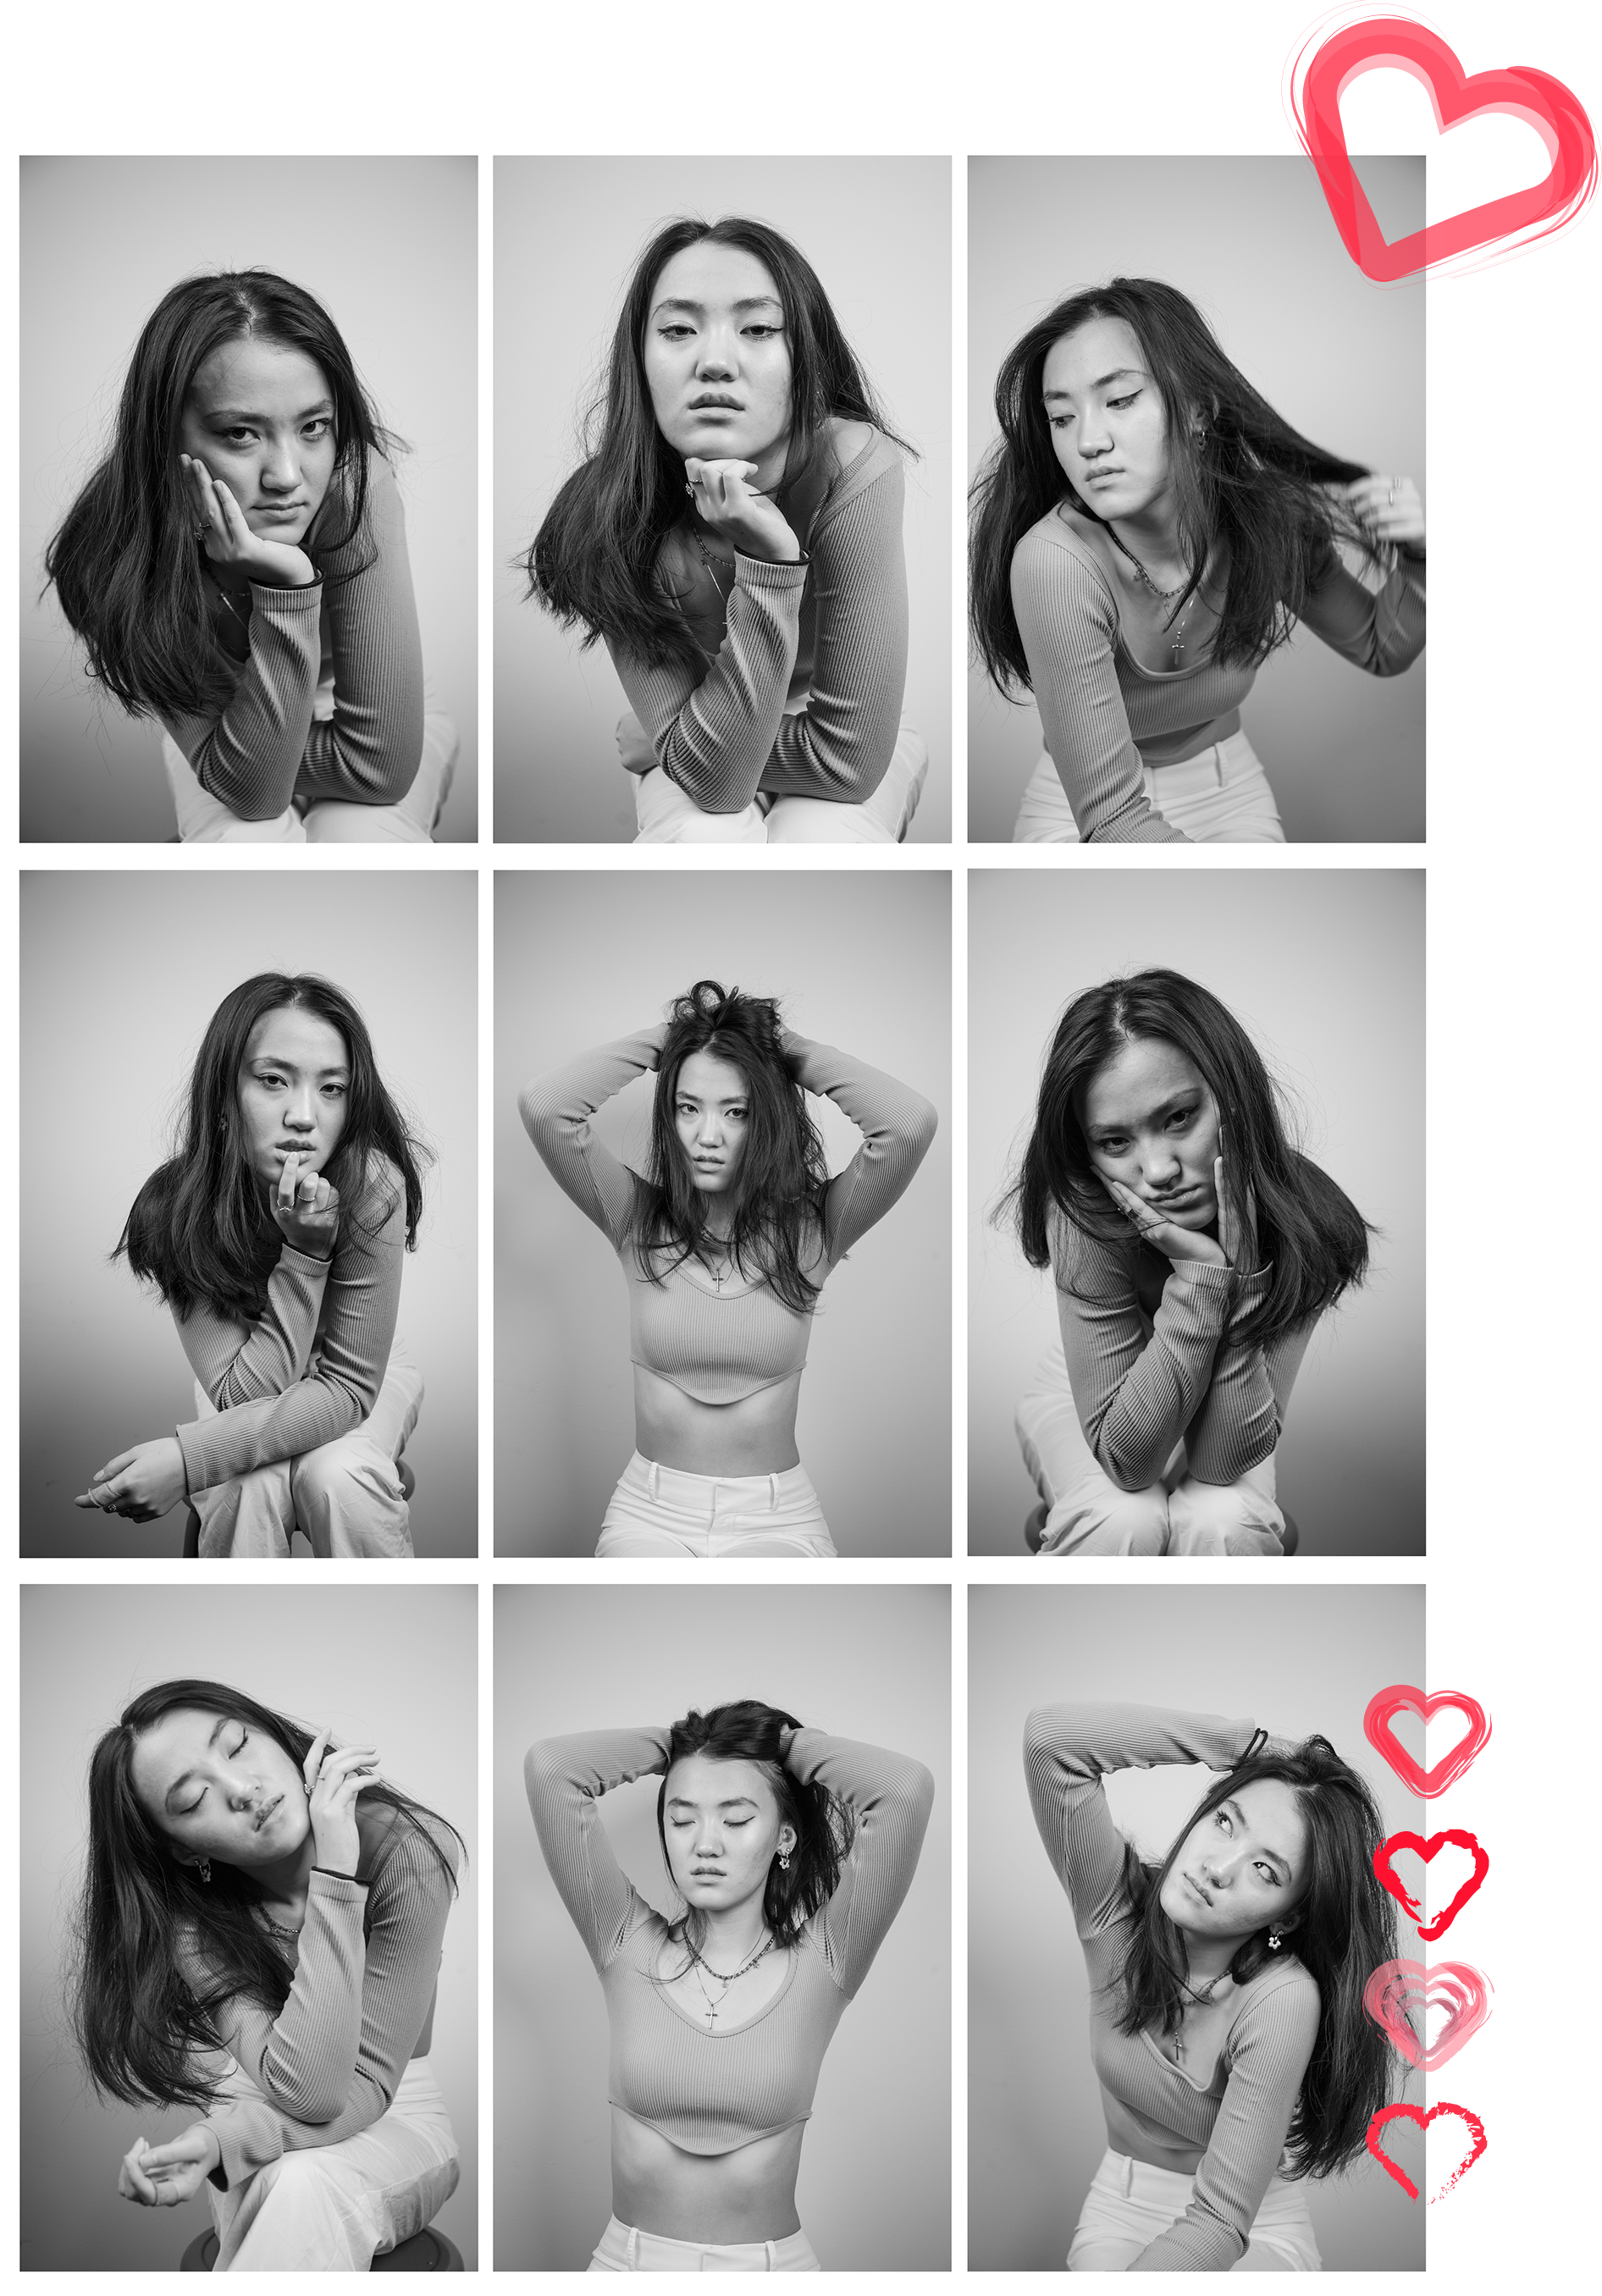 A grid with 9 photos of a girl sitting on a stool with various facial expressions and poses.